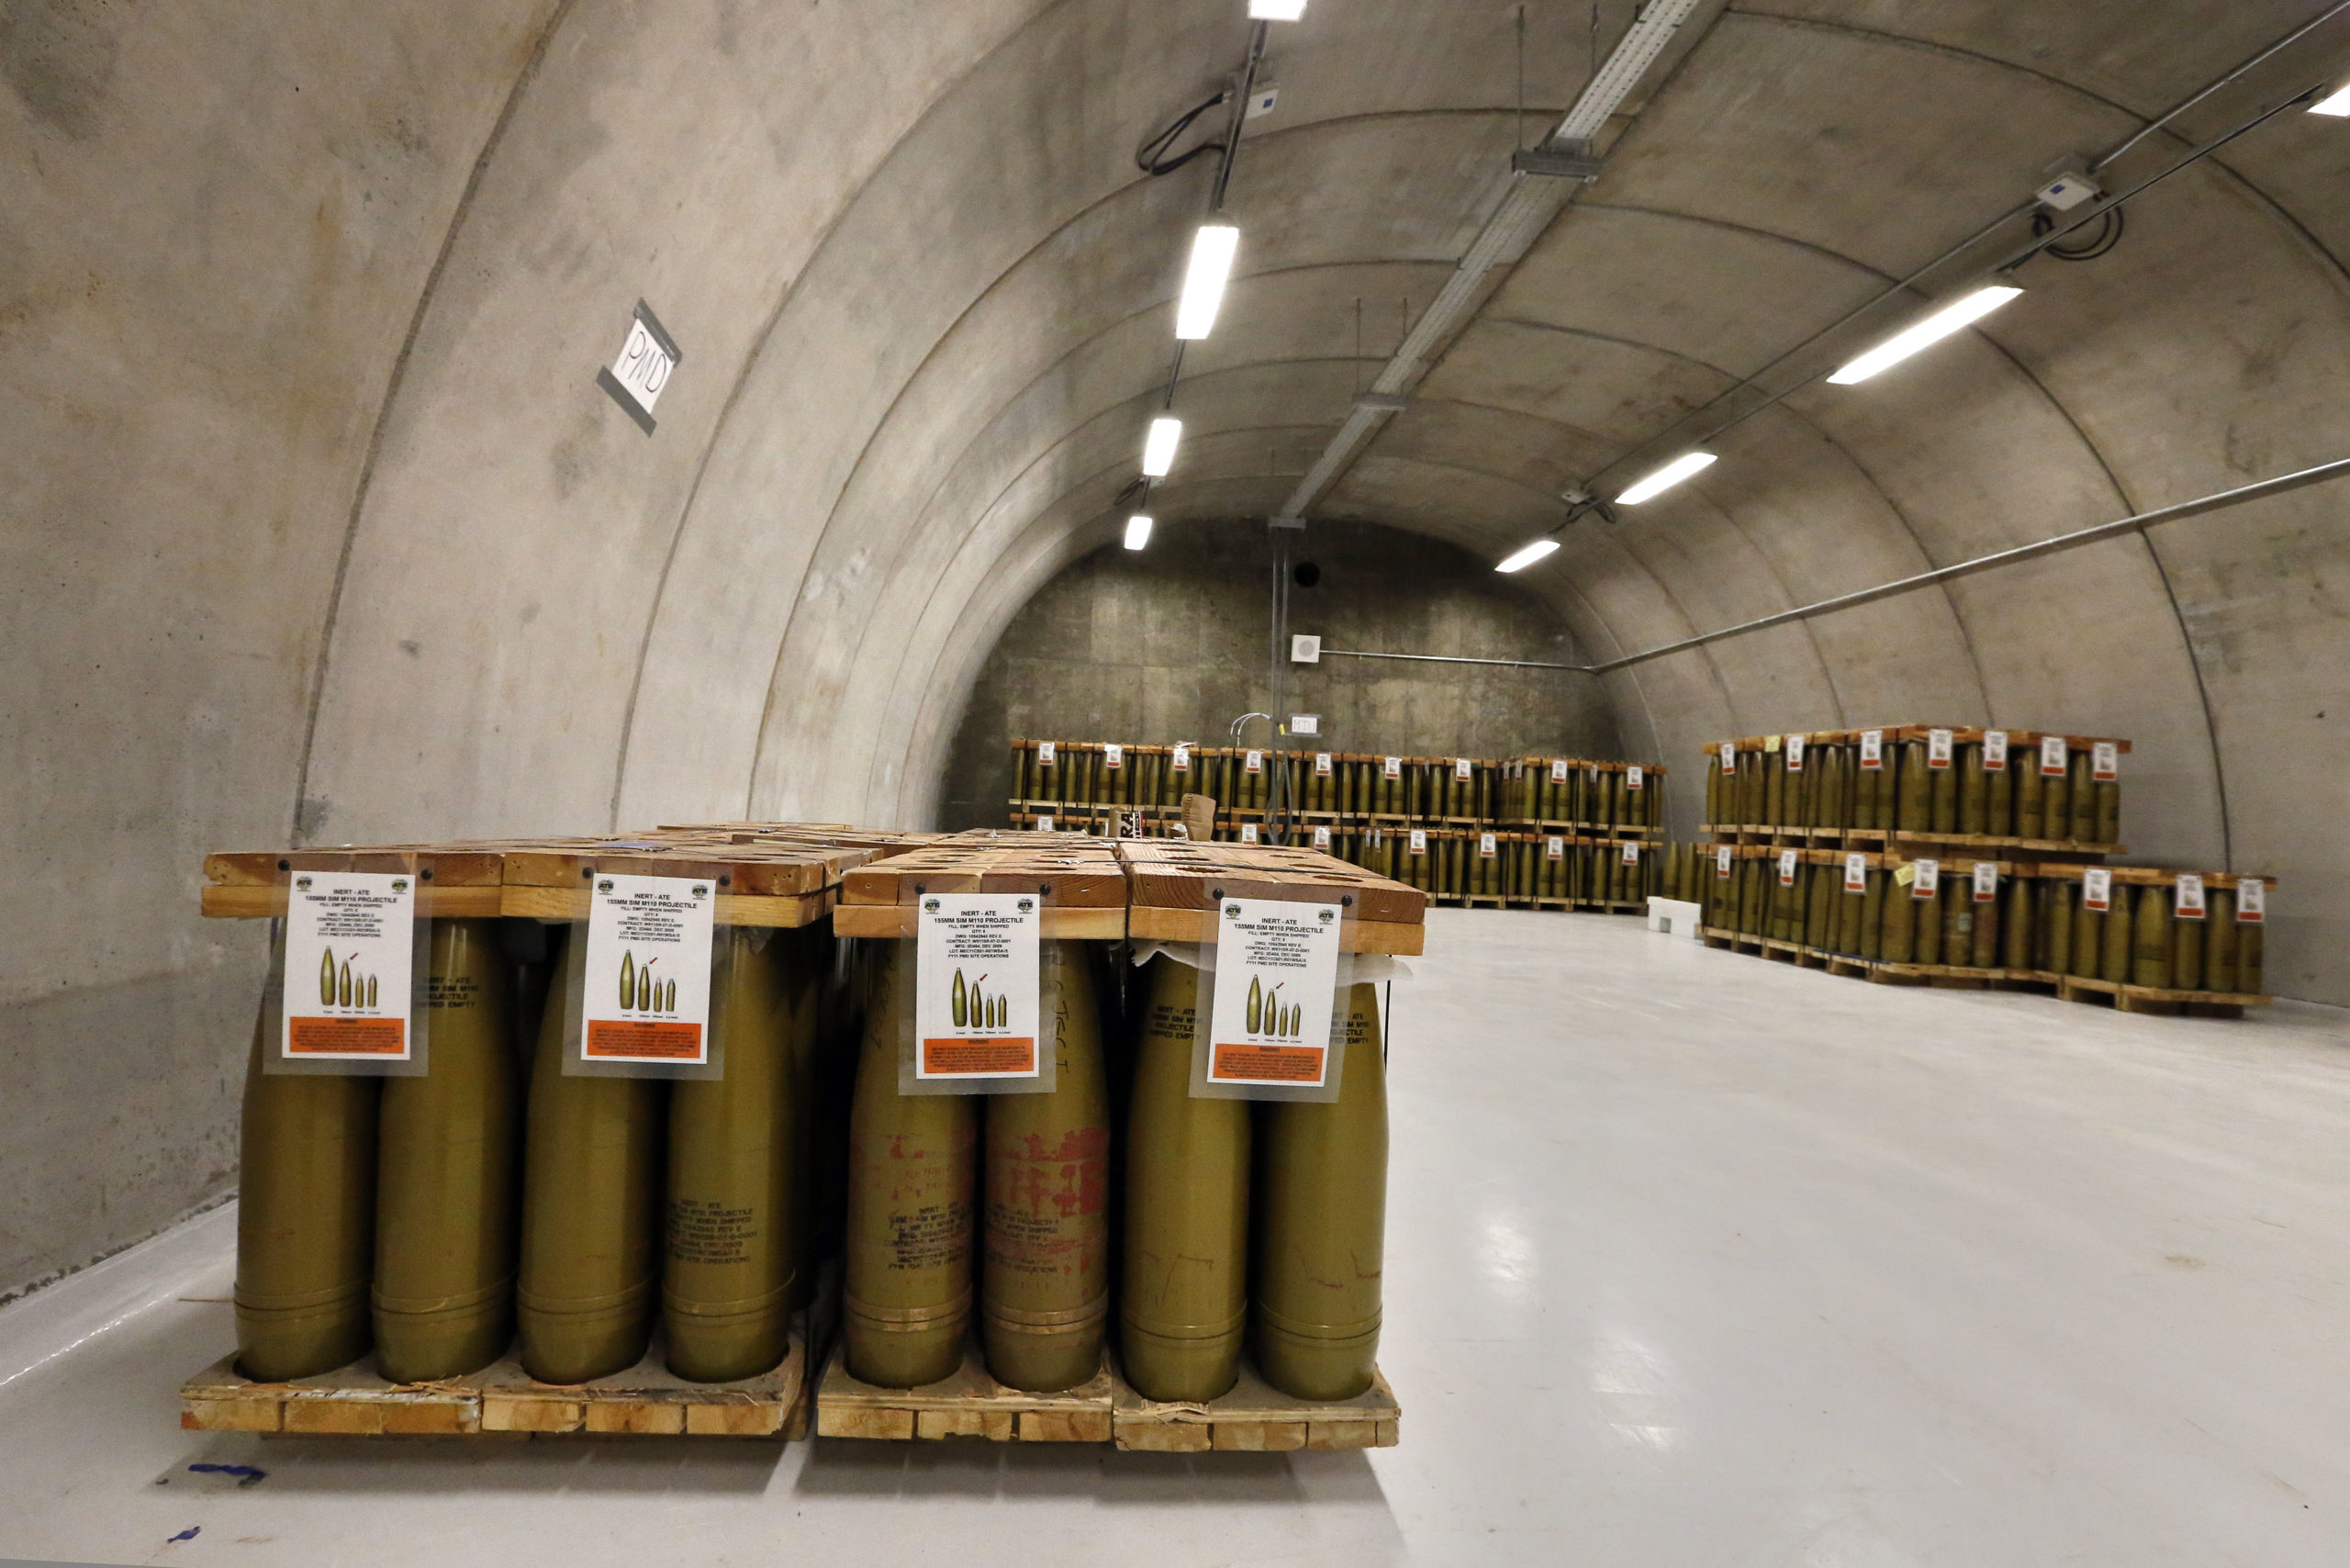 Inside The Bunkers Where The US Will Obliterate Its Chemical Weapons